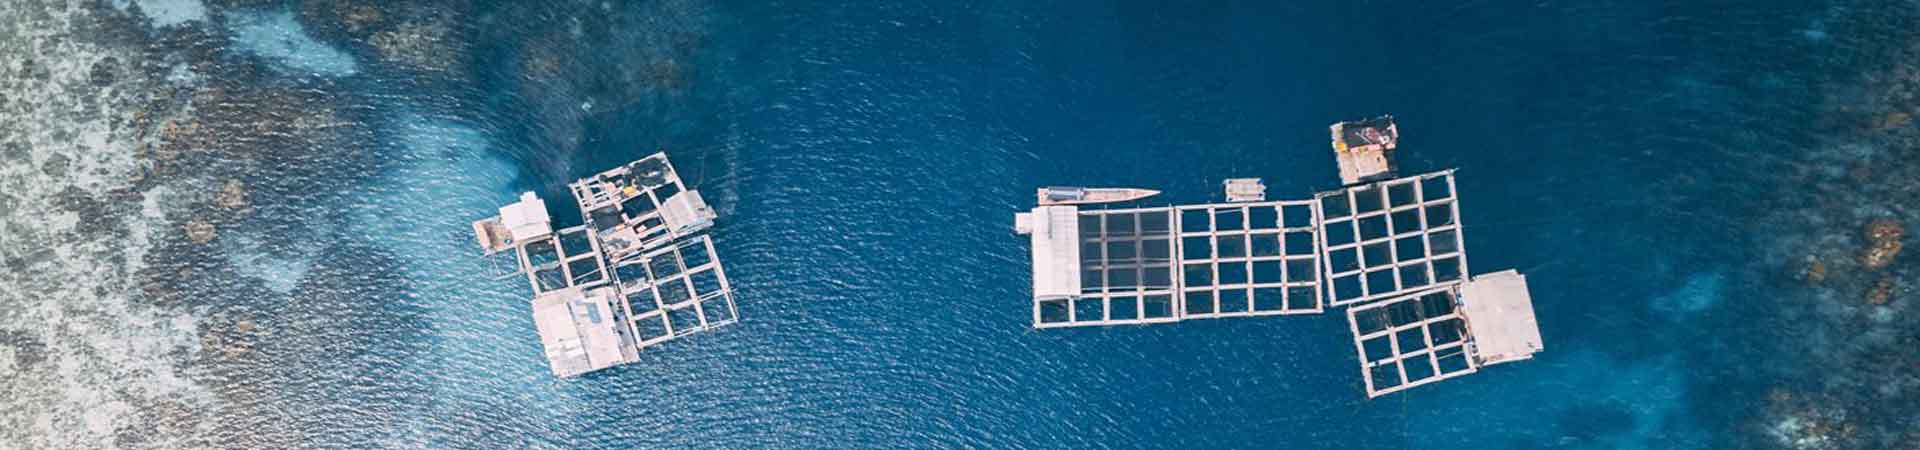 Aerial image showing cages of aquaculture in warm water 